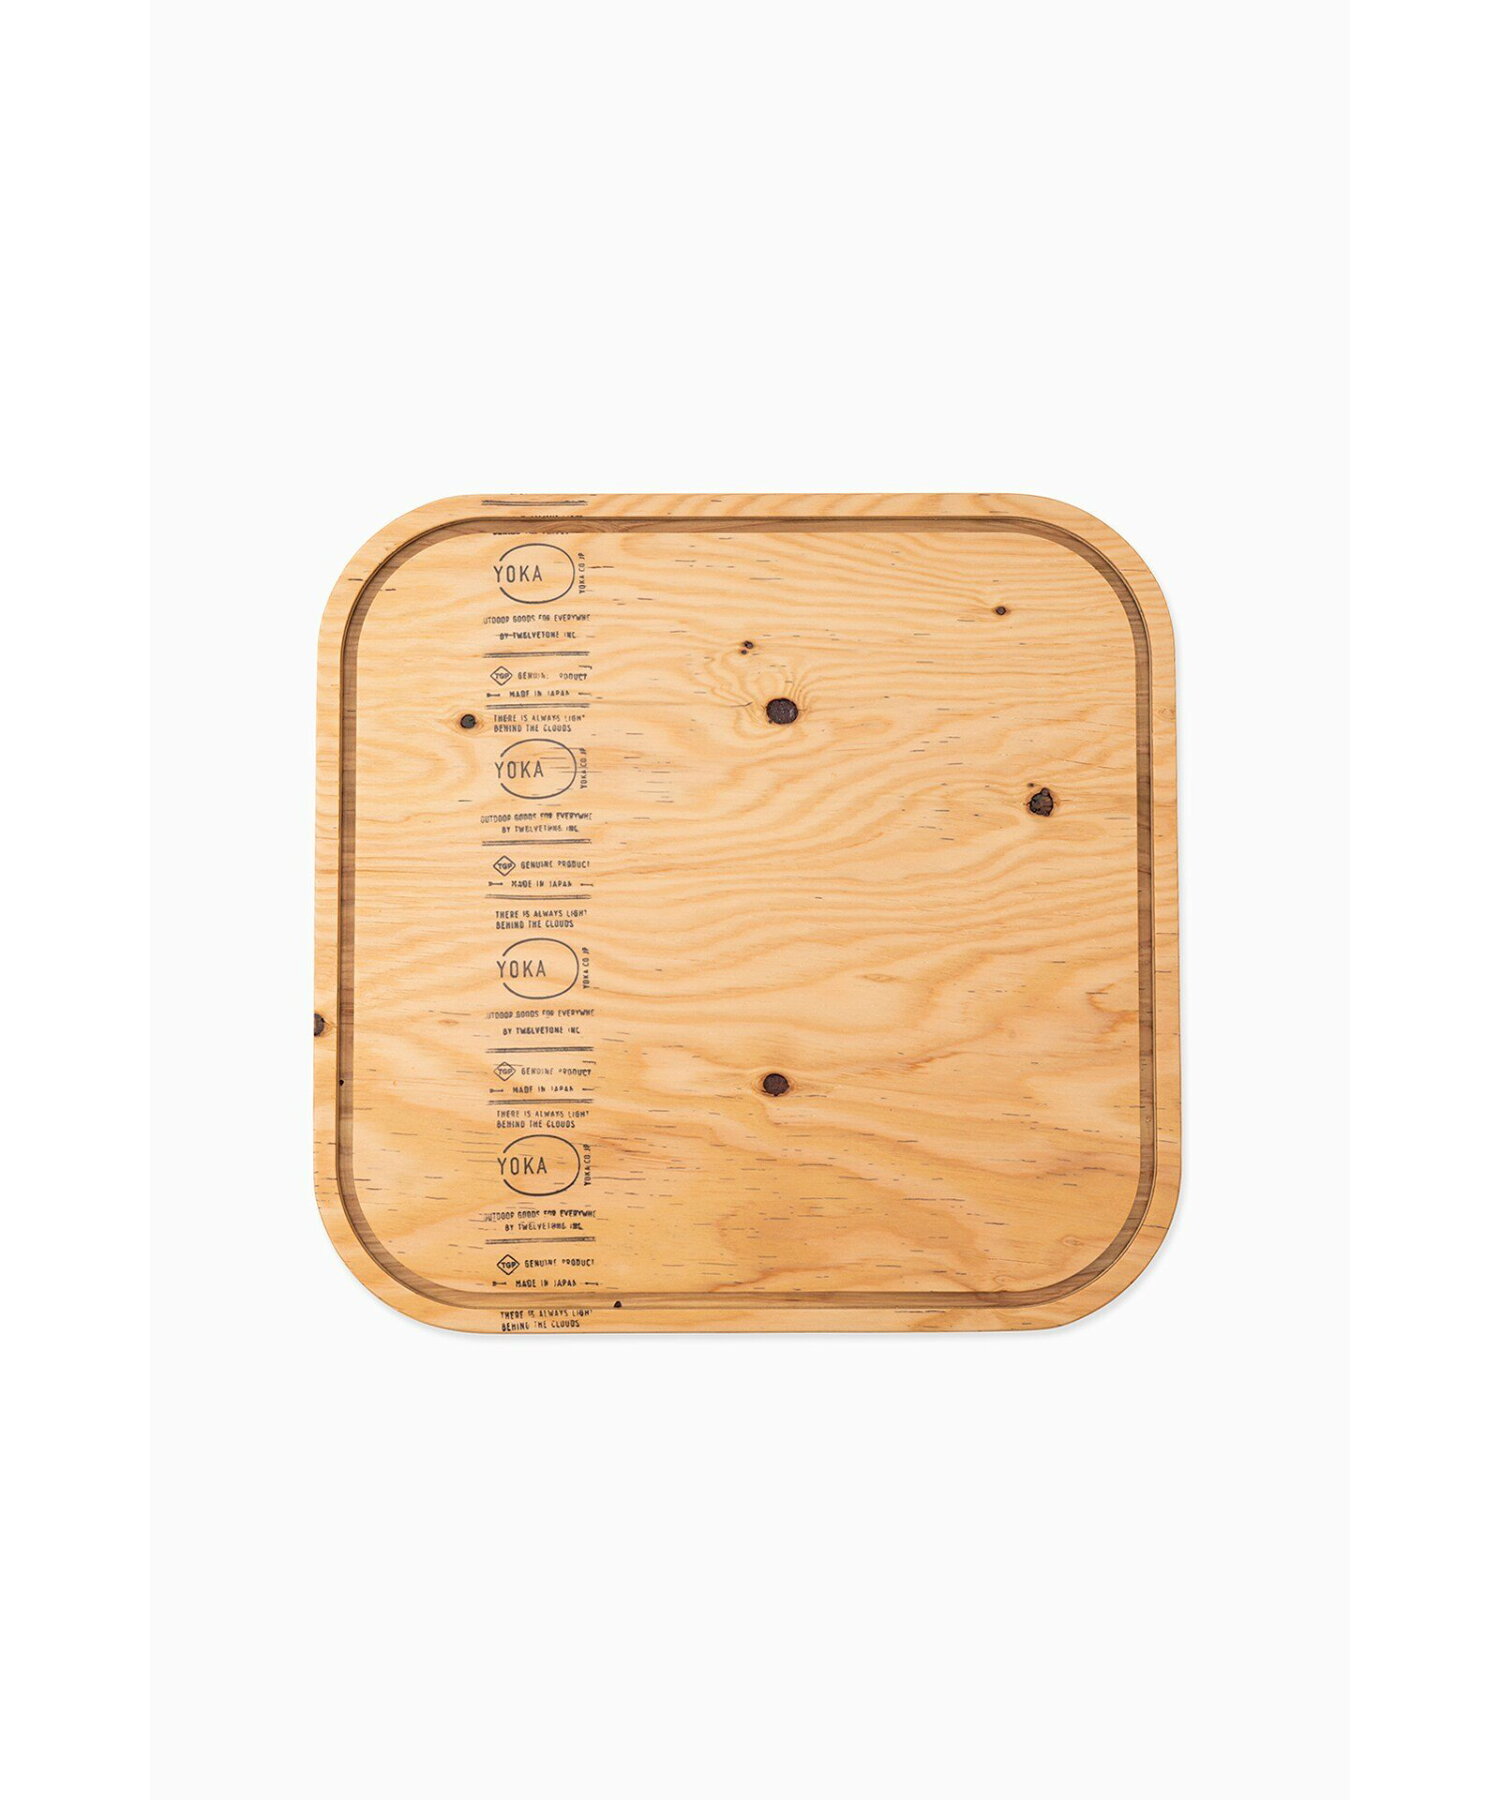 wood table top 30